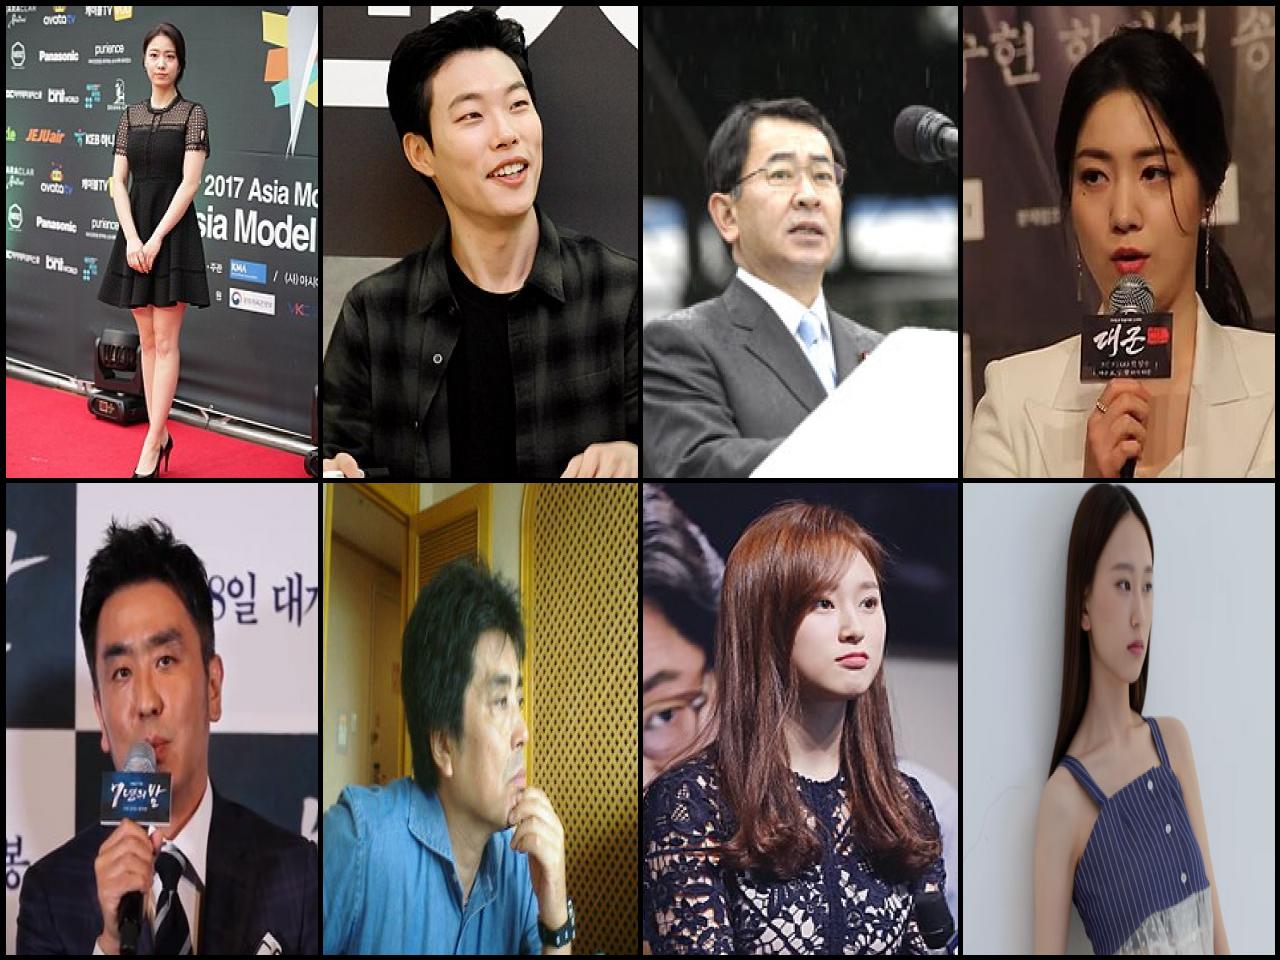 List of Famous people named <b>Ryu</b>